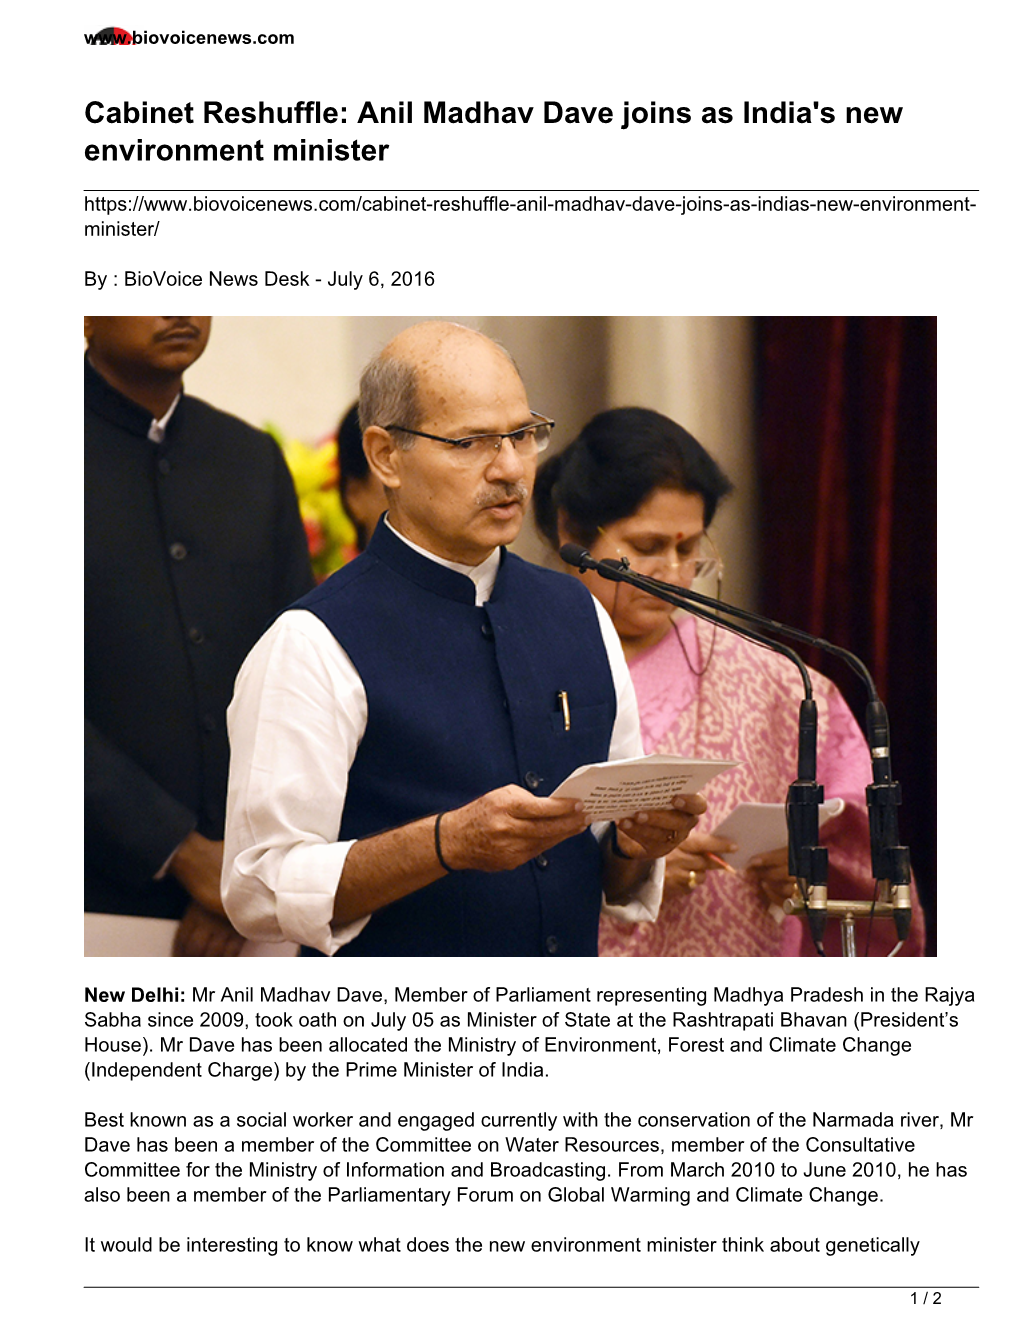 Cabinet Reshuffle: Anil Madhav Dave Joins As India&